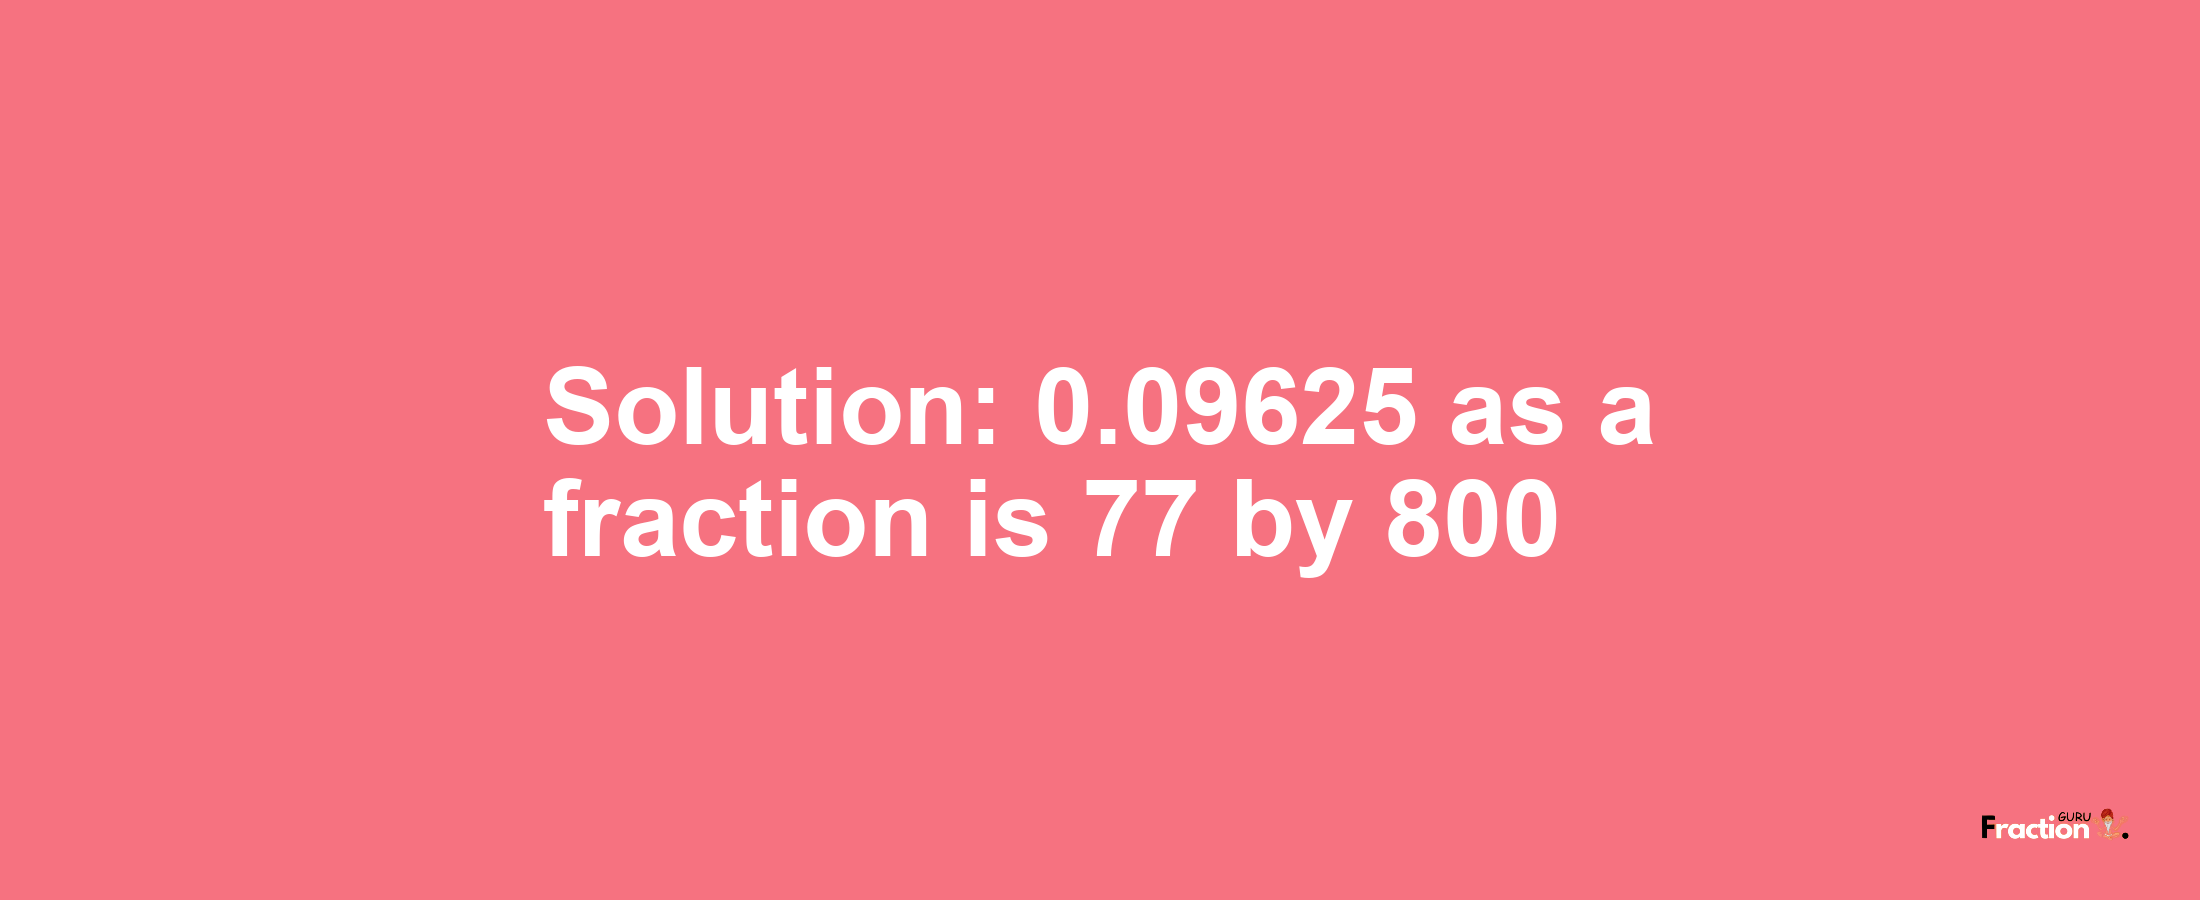 Solution:0.09625 as a fraction is 77/800